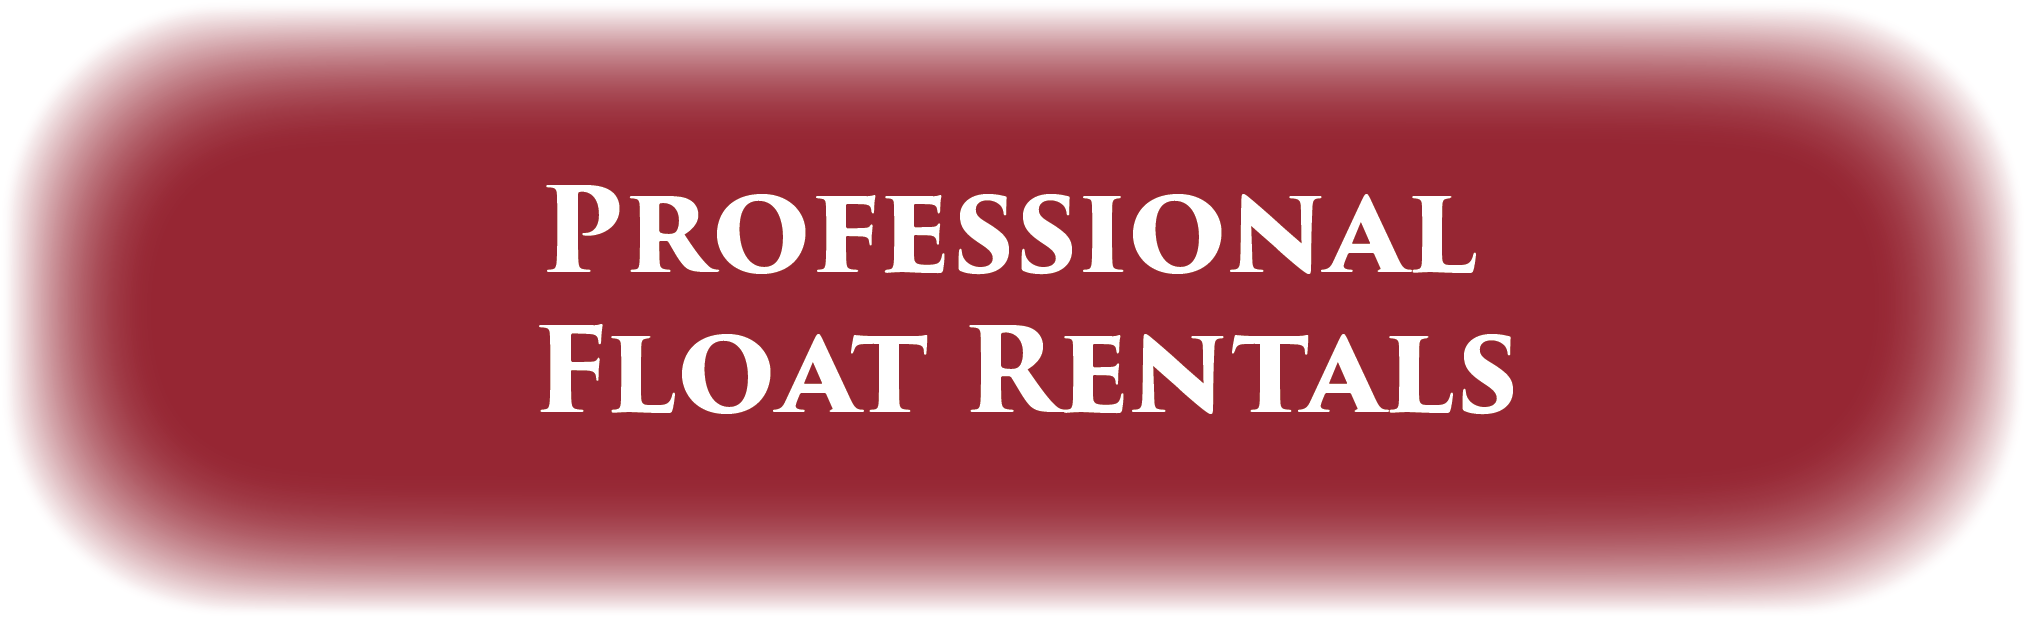 click here for float rentals